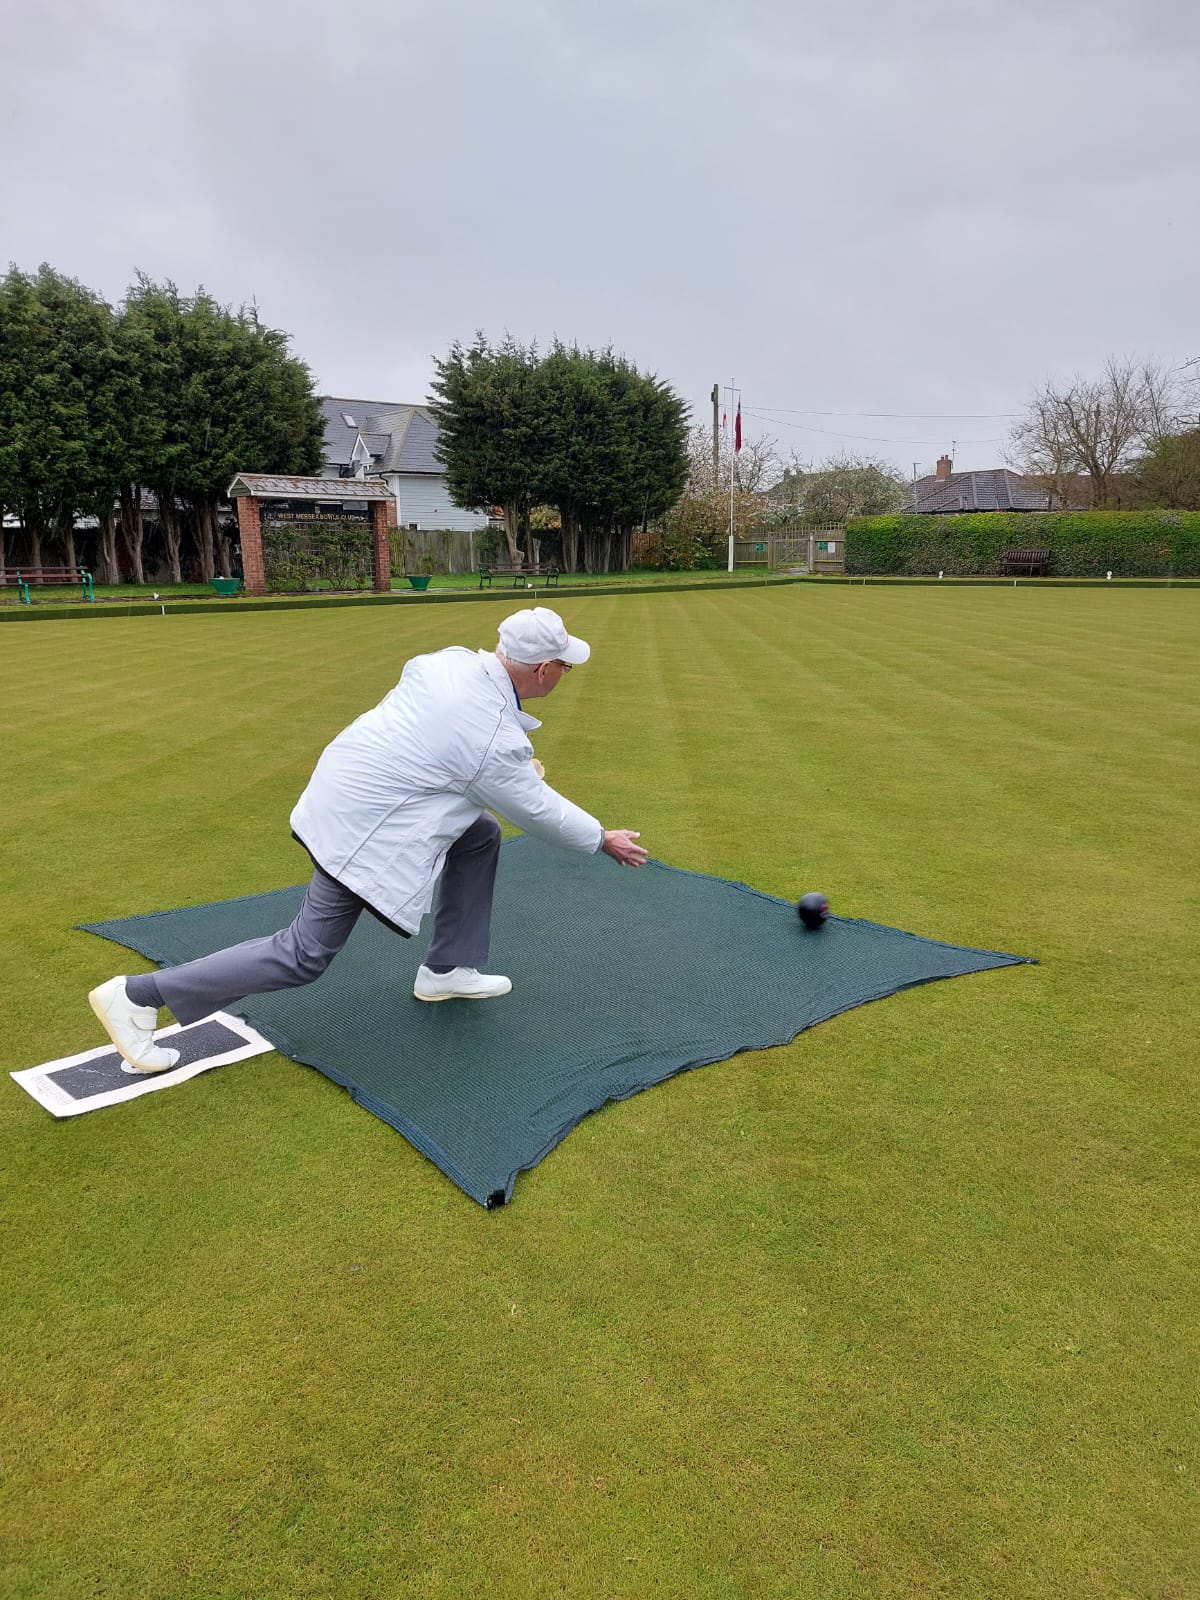 The Club President, Barrie Clements, bowls the first wood of the new season.